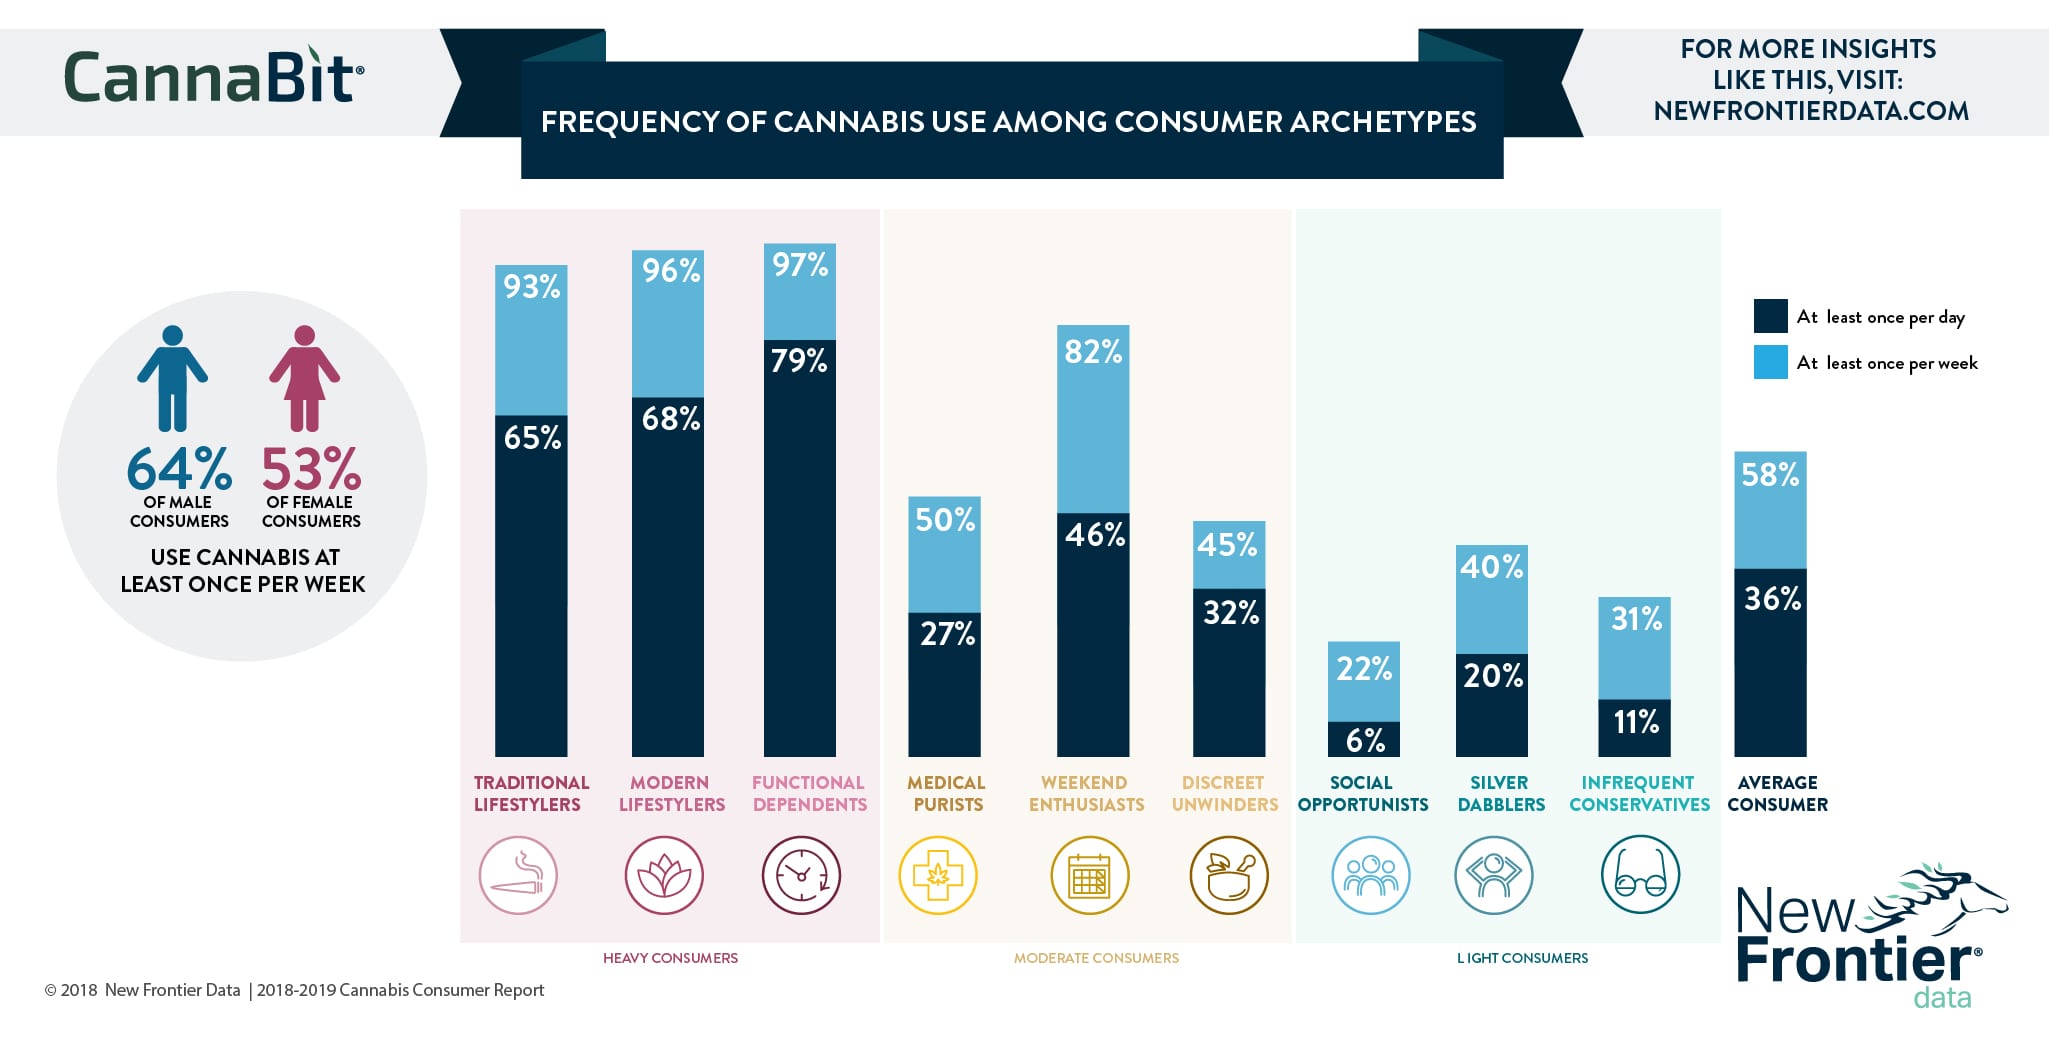 Frequency of Cannabis Use Among Consumer Archetypes - New Frontier Data